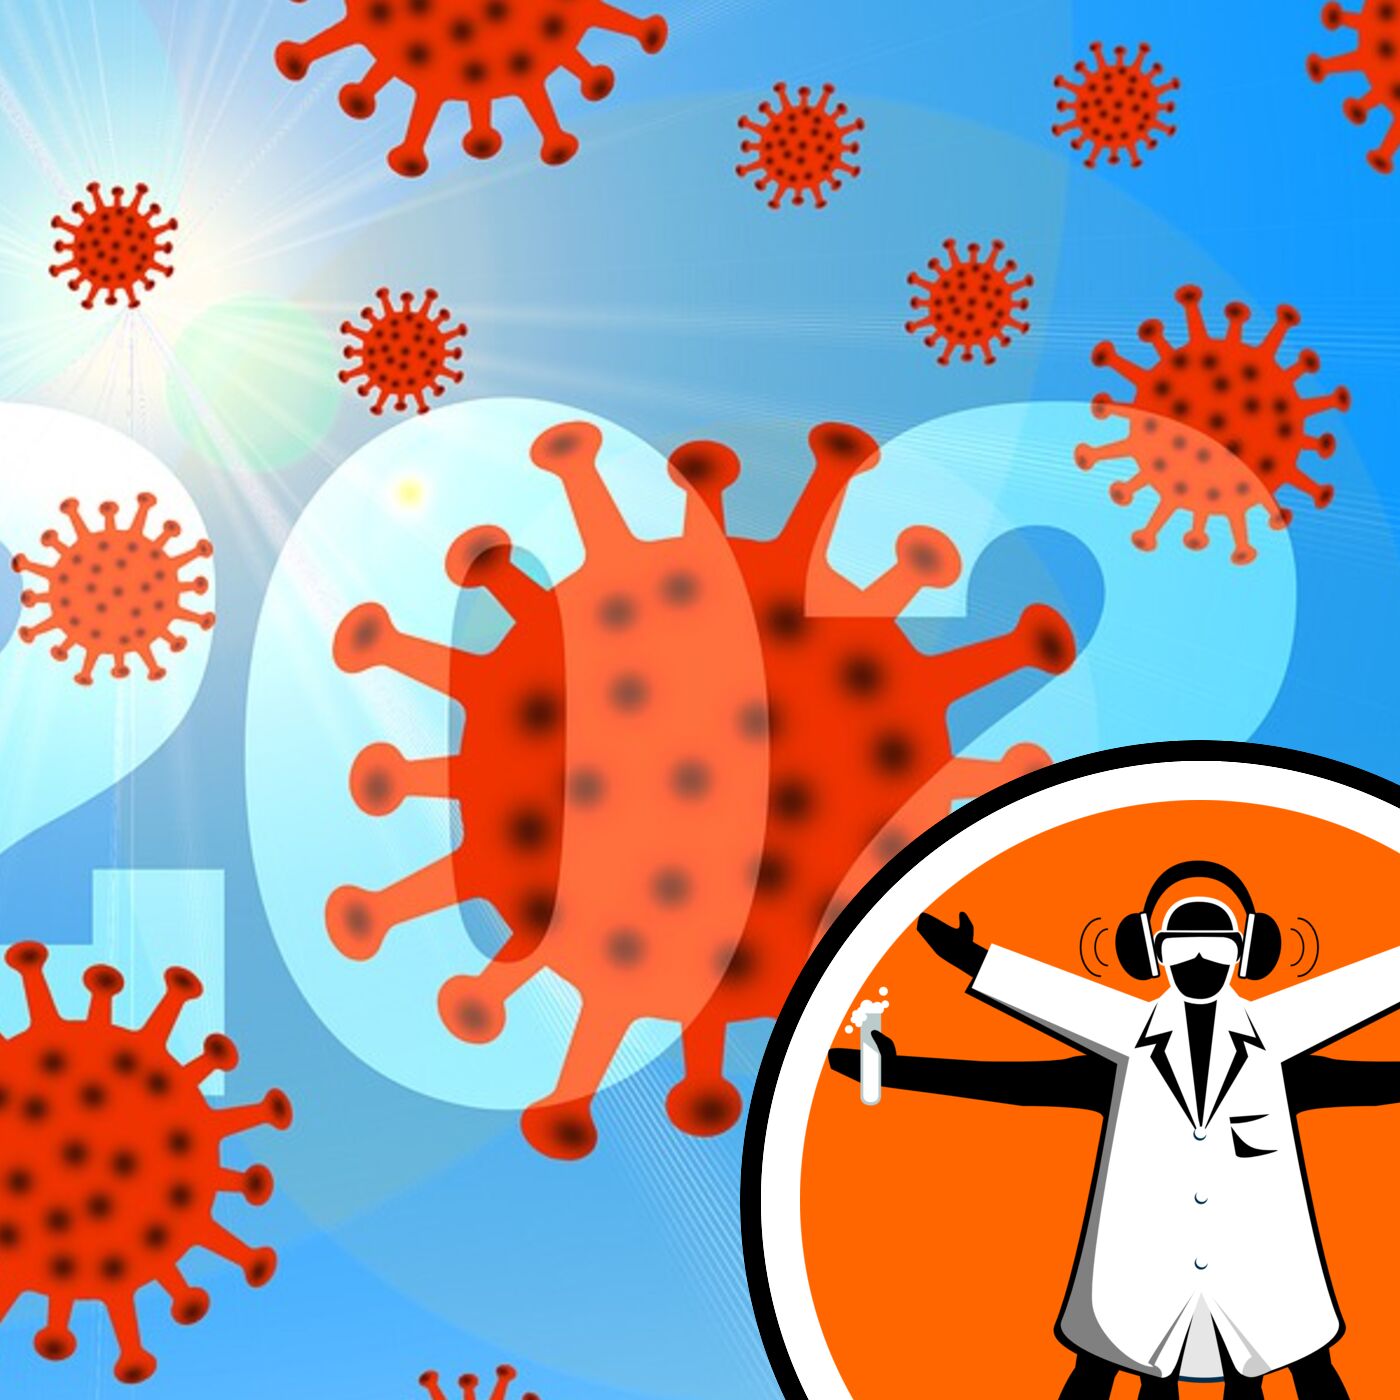 Covid viruses, vaccines and variants